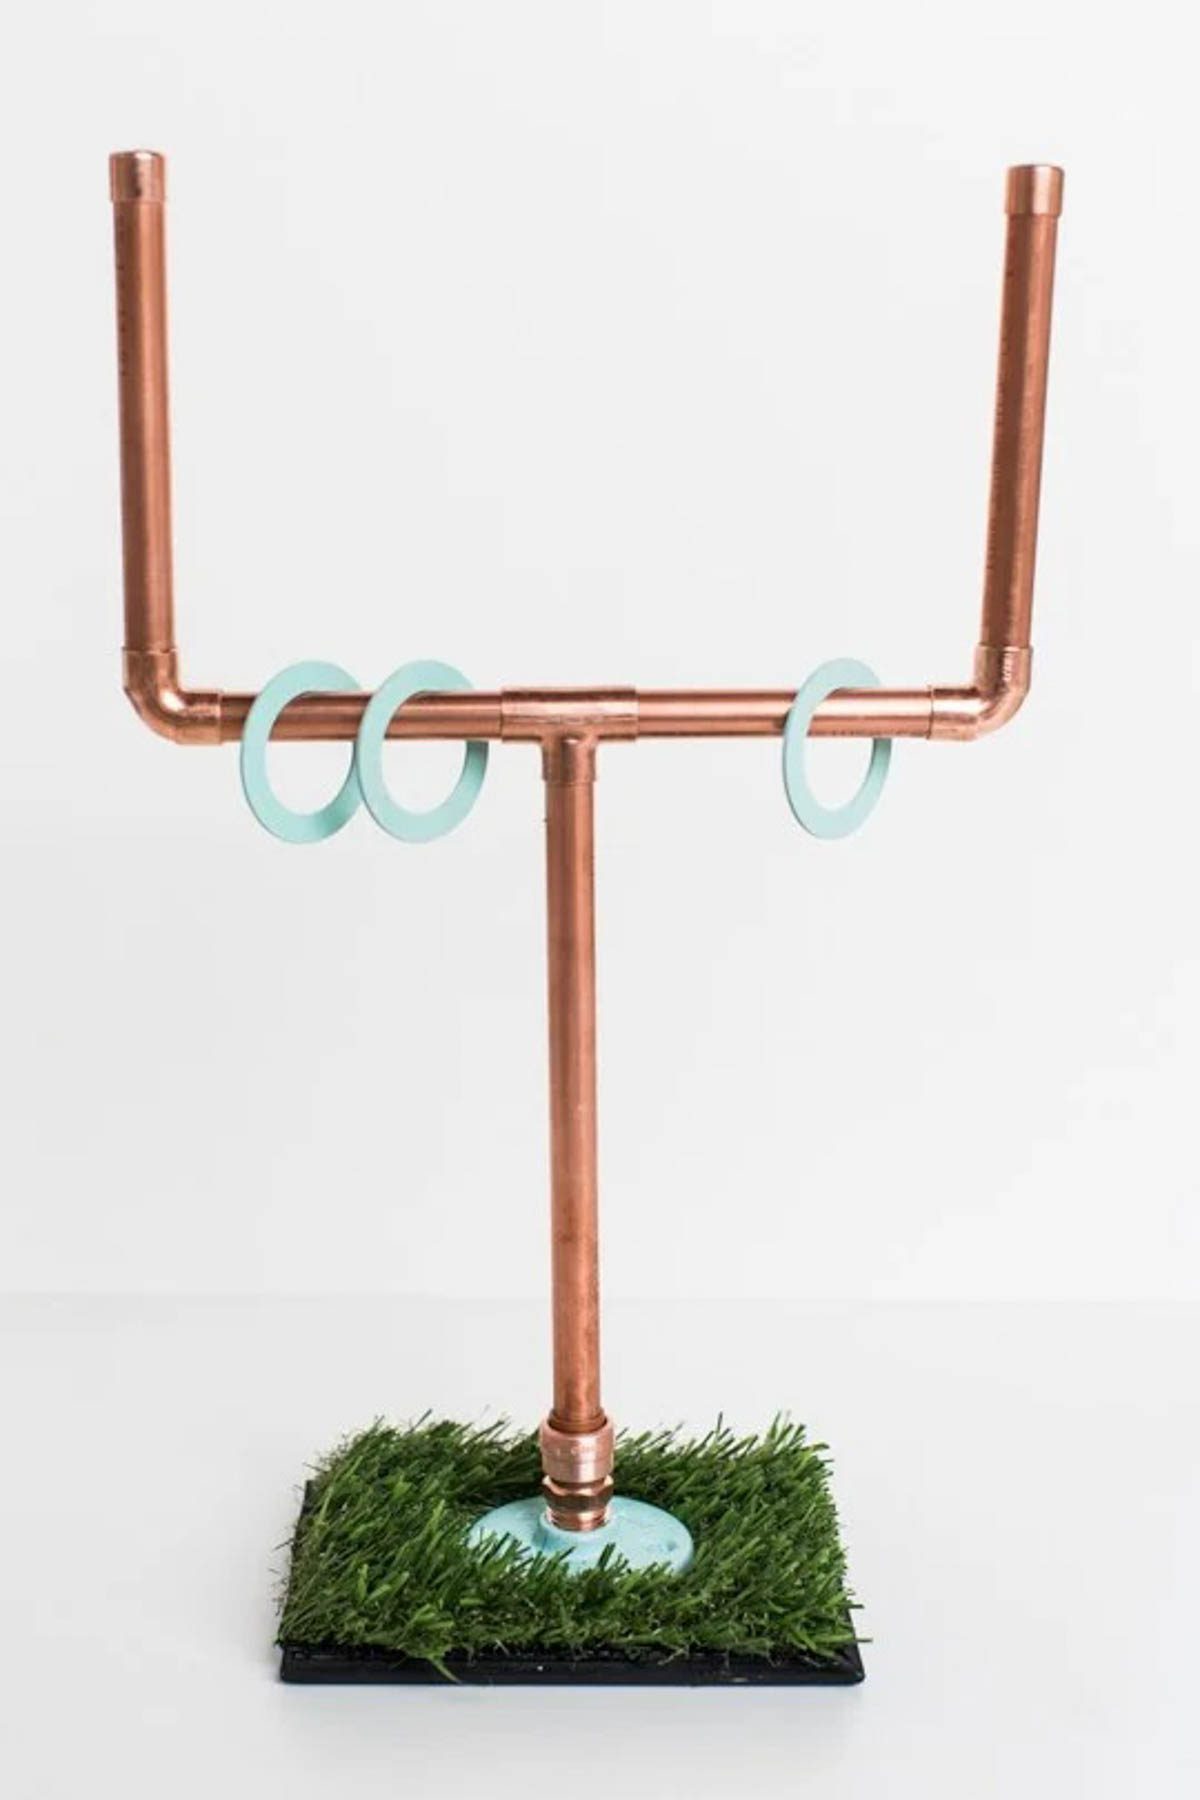 washer toss game made from copper pipe